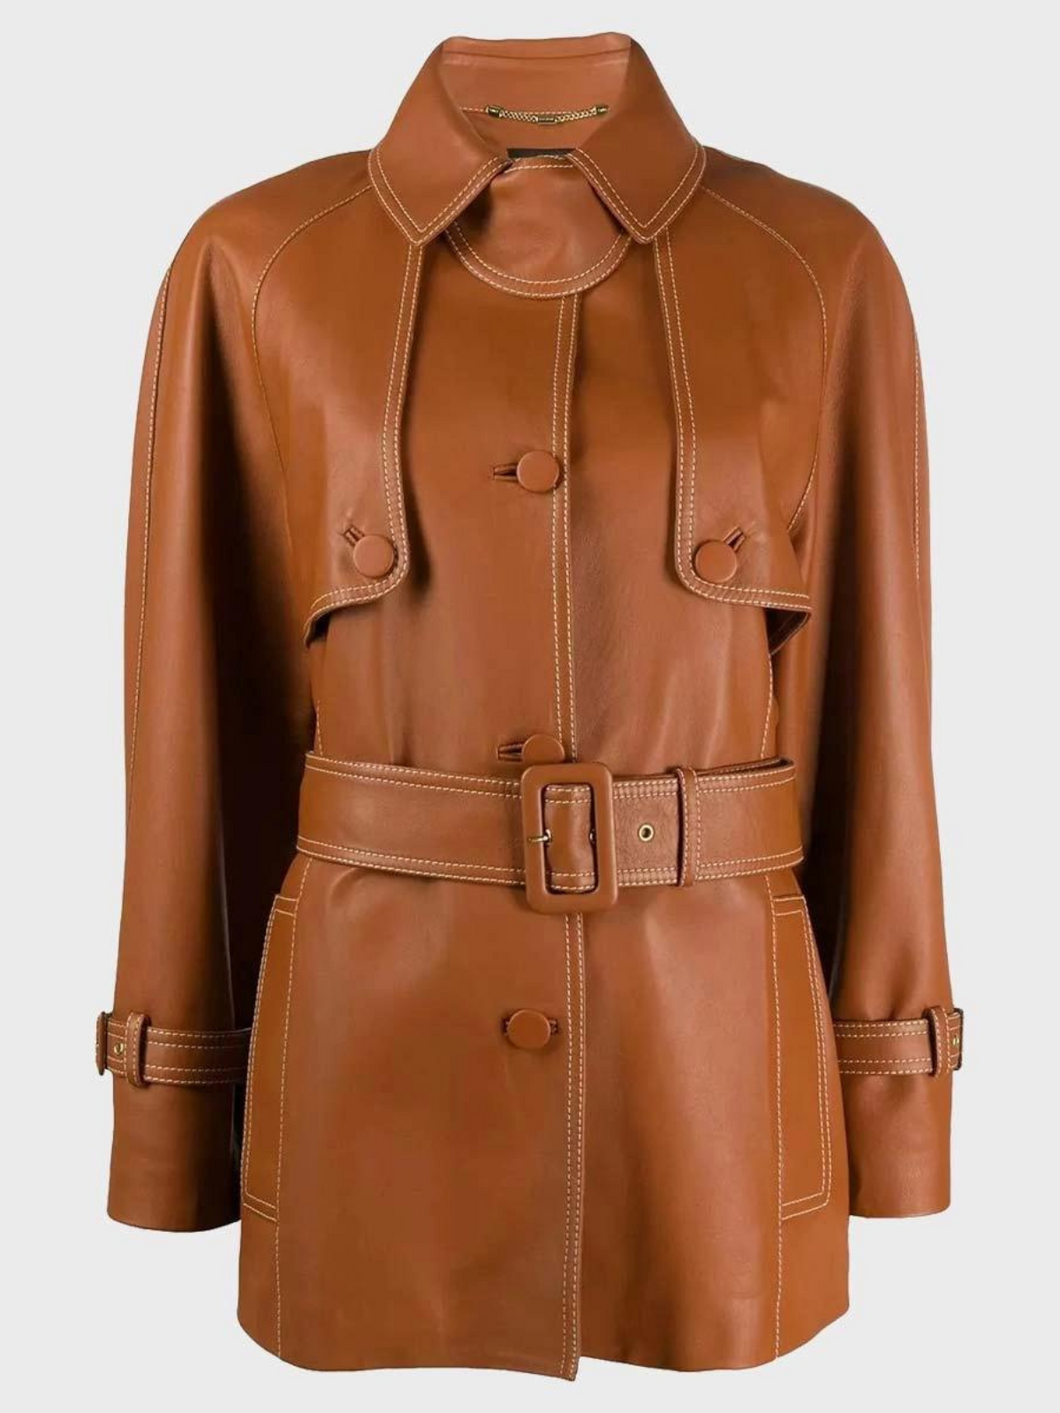 Women’s Stylish Brown Belted Leather Coat